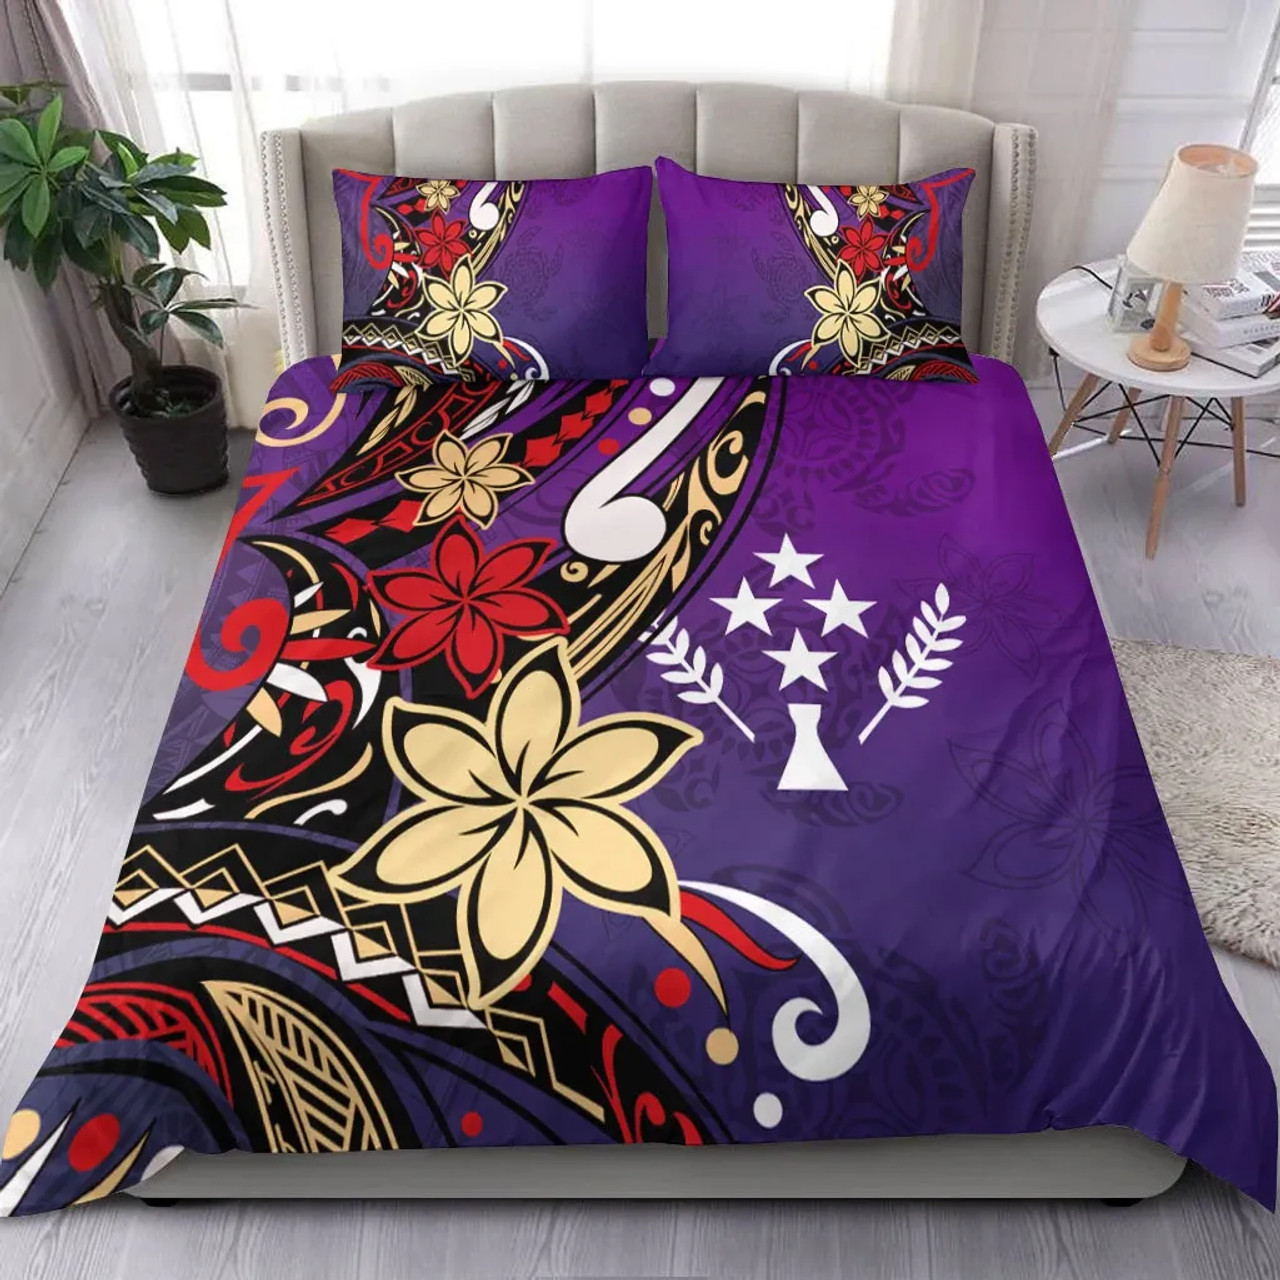 Kosrae Polynesian Bedding Set - Tribal Flower With Special Turtles Purple Color 1